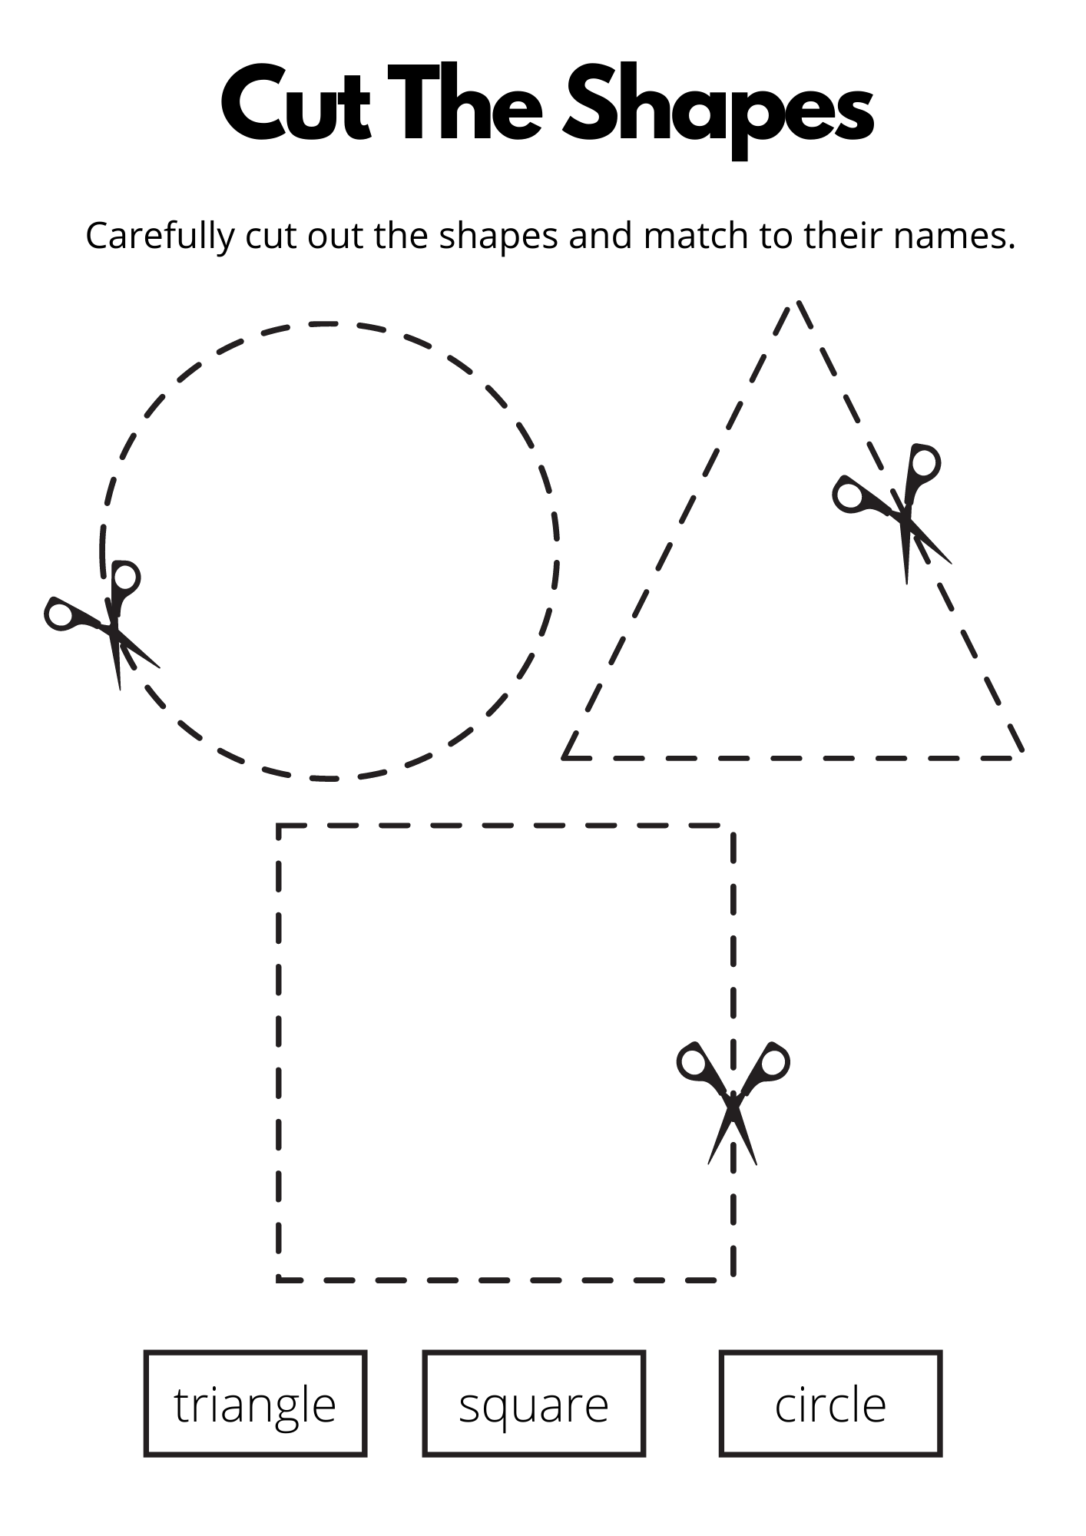 cut-the-shapes-motor-skills-activity-sheet-help-my-kids-are-bored